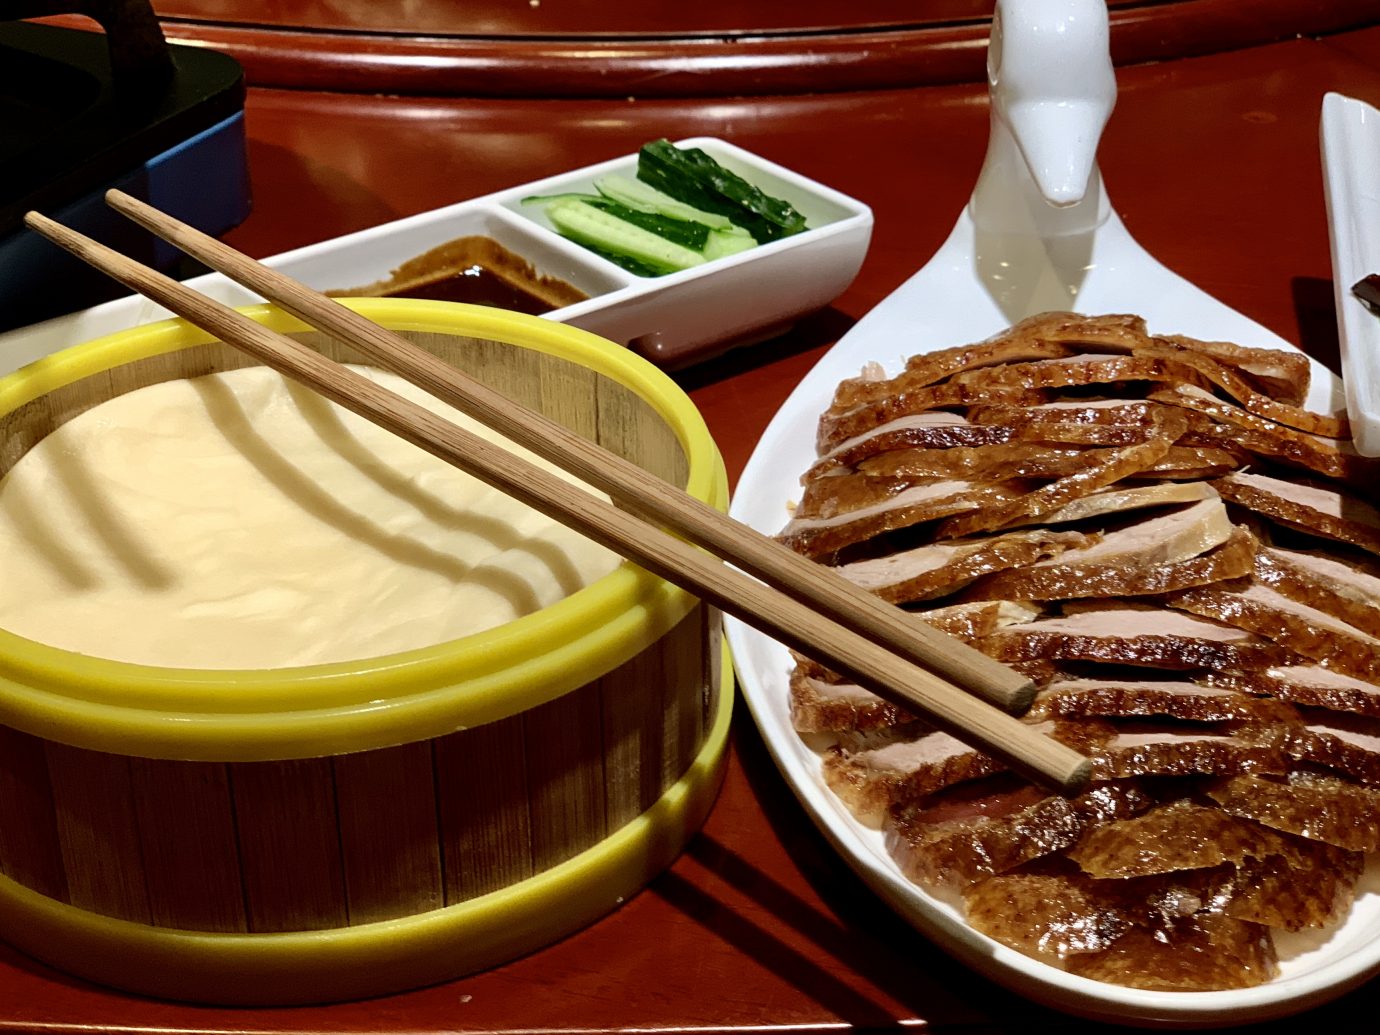 Beijing’s famed Peking Duck is sliced thin and served with rice pancakes, cucumber, onion and “peking” sauce.